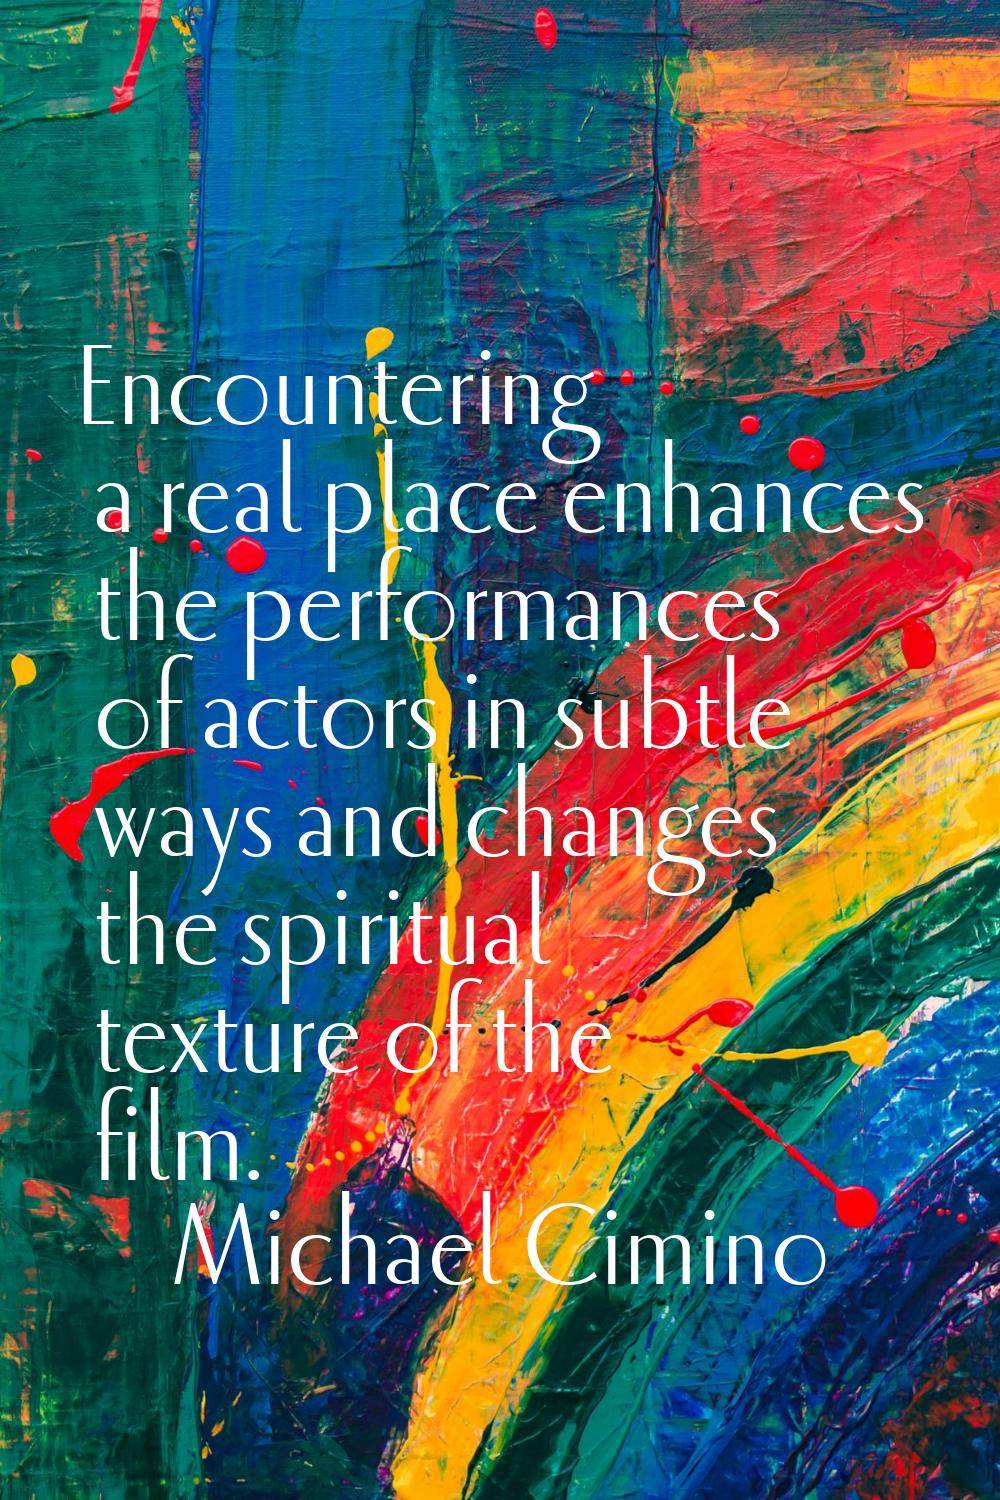 Encountering a real place enhances the performances of actors in subtle ways and changes the spirit